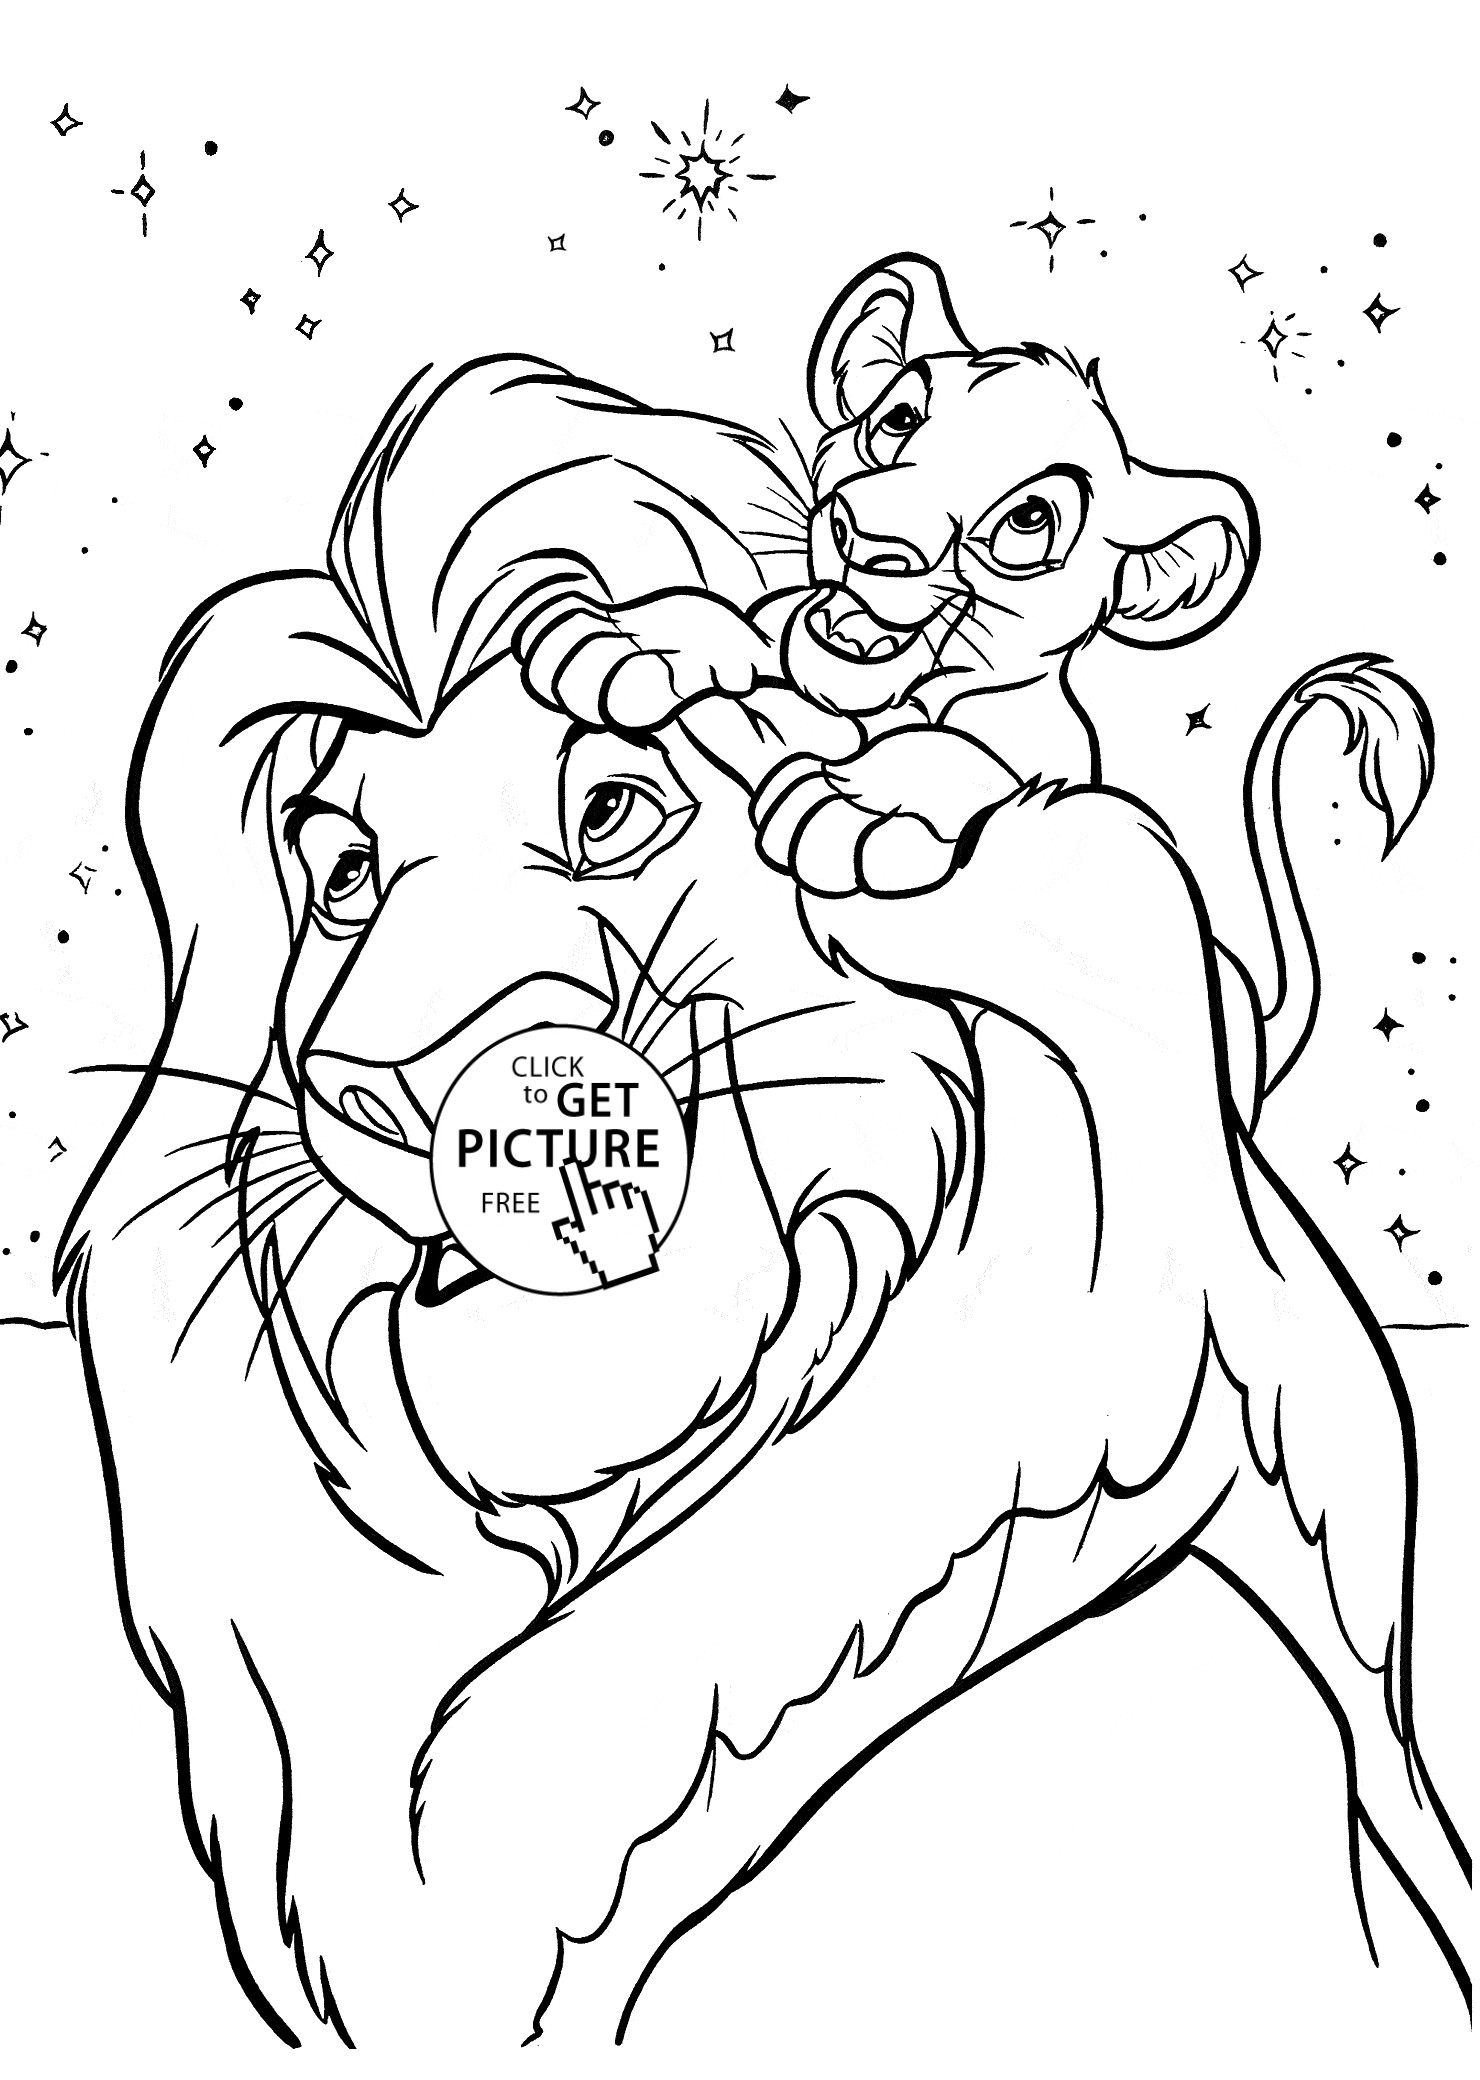 Free Disney Coloring Pages For Kids
 Lion King coloring page for kids disney coloring pages